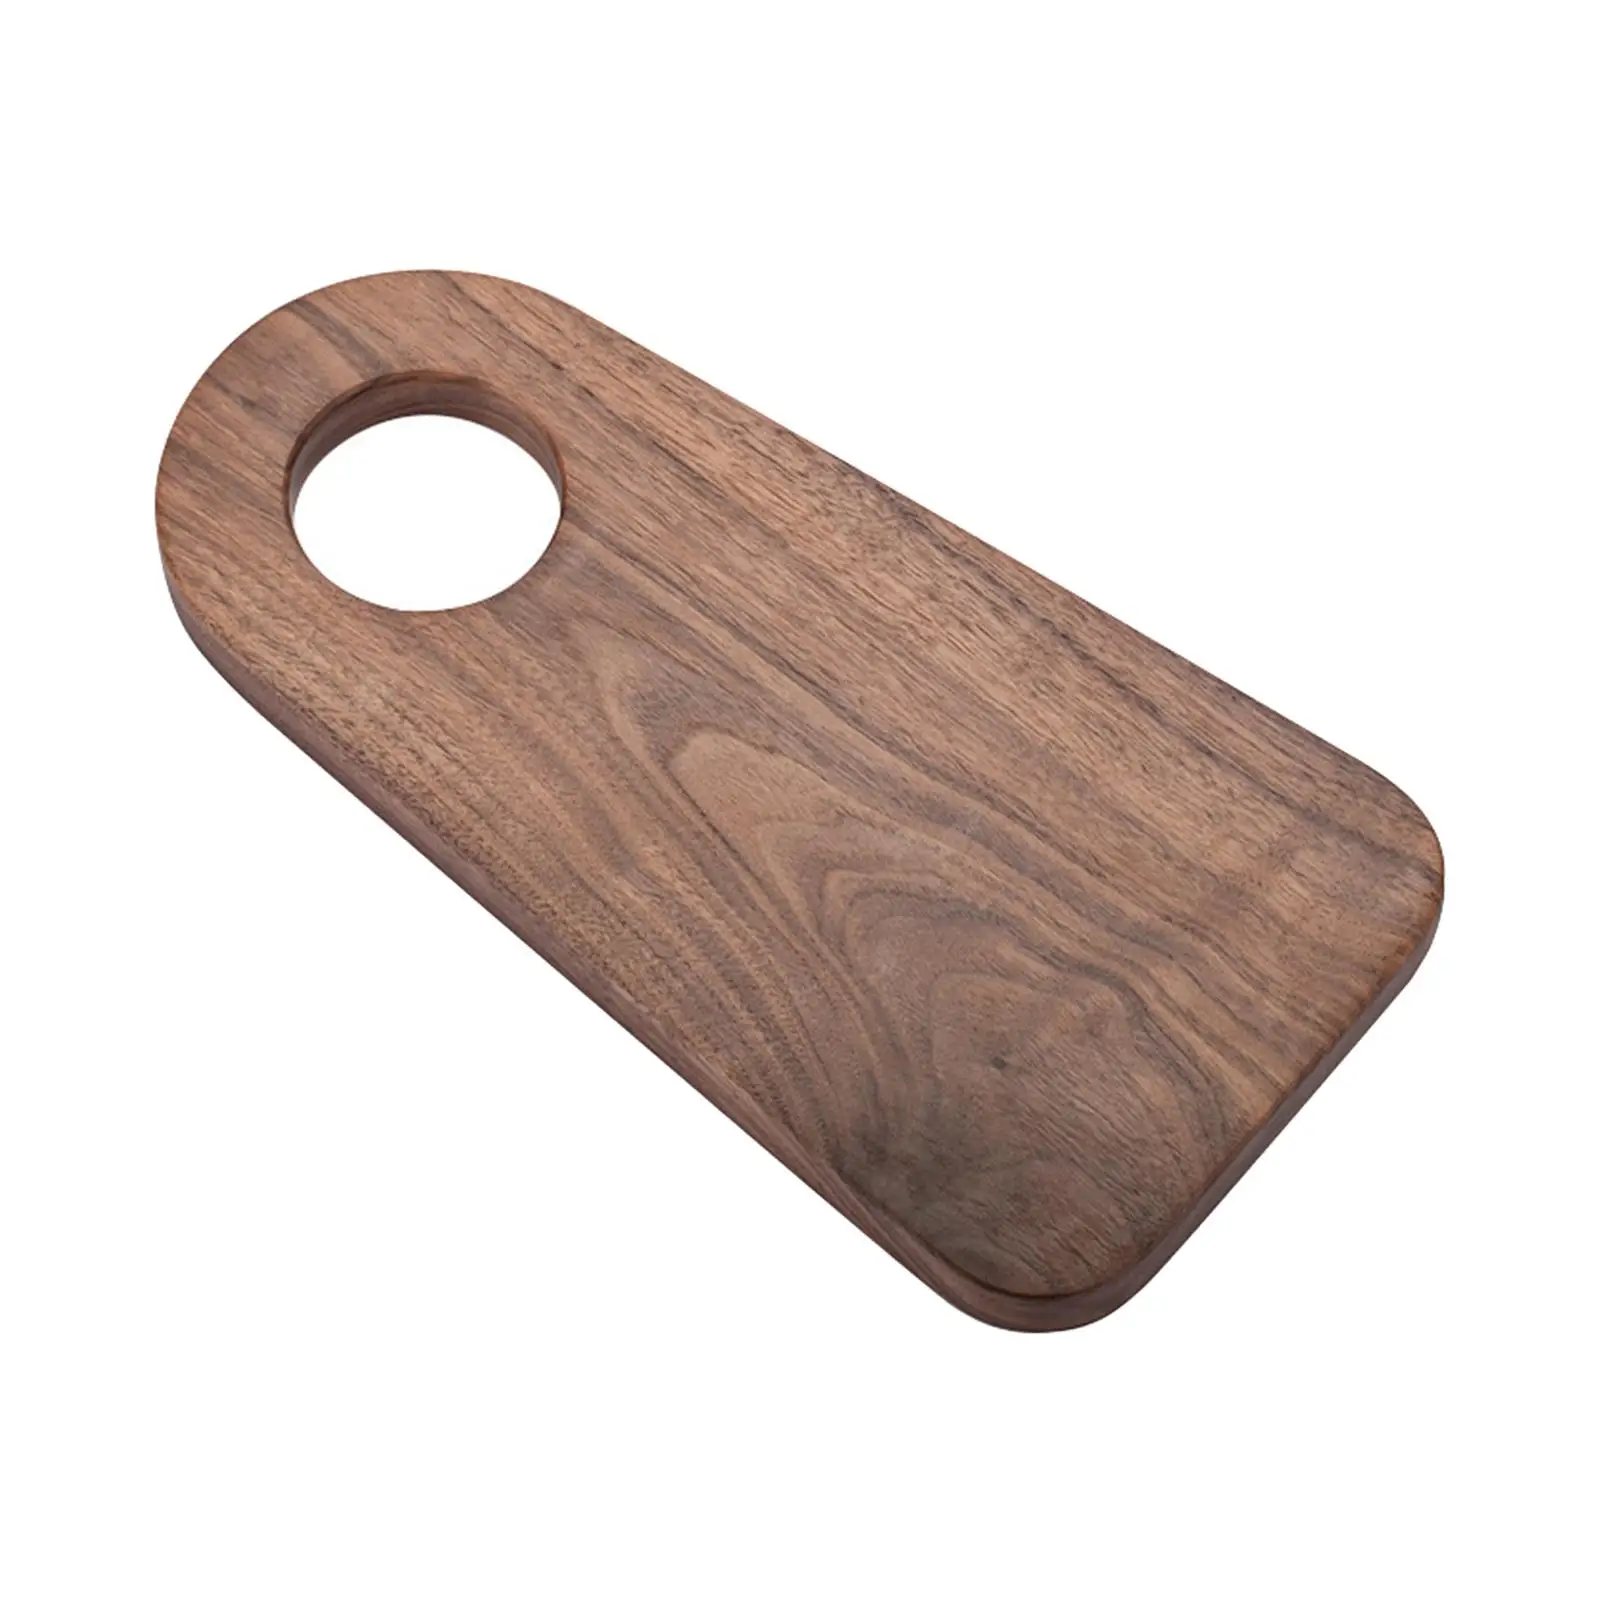 Wooden Chopping Board Kitchen Baking Tools Utensils with Handle Bread Tray Serving Board Cutting Board for Vegetables Fruits